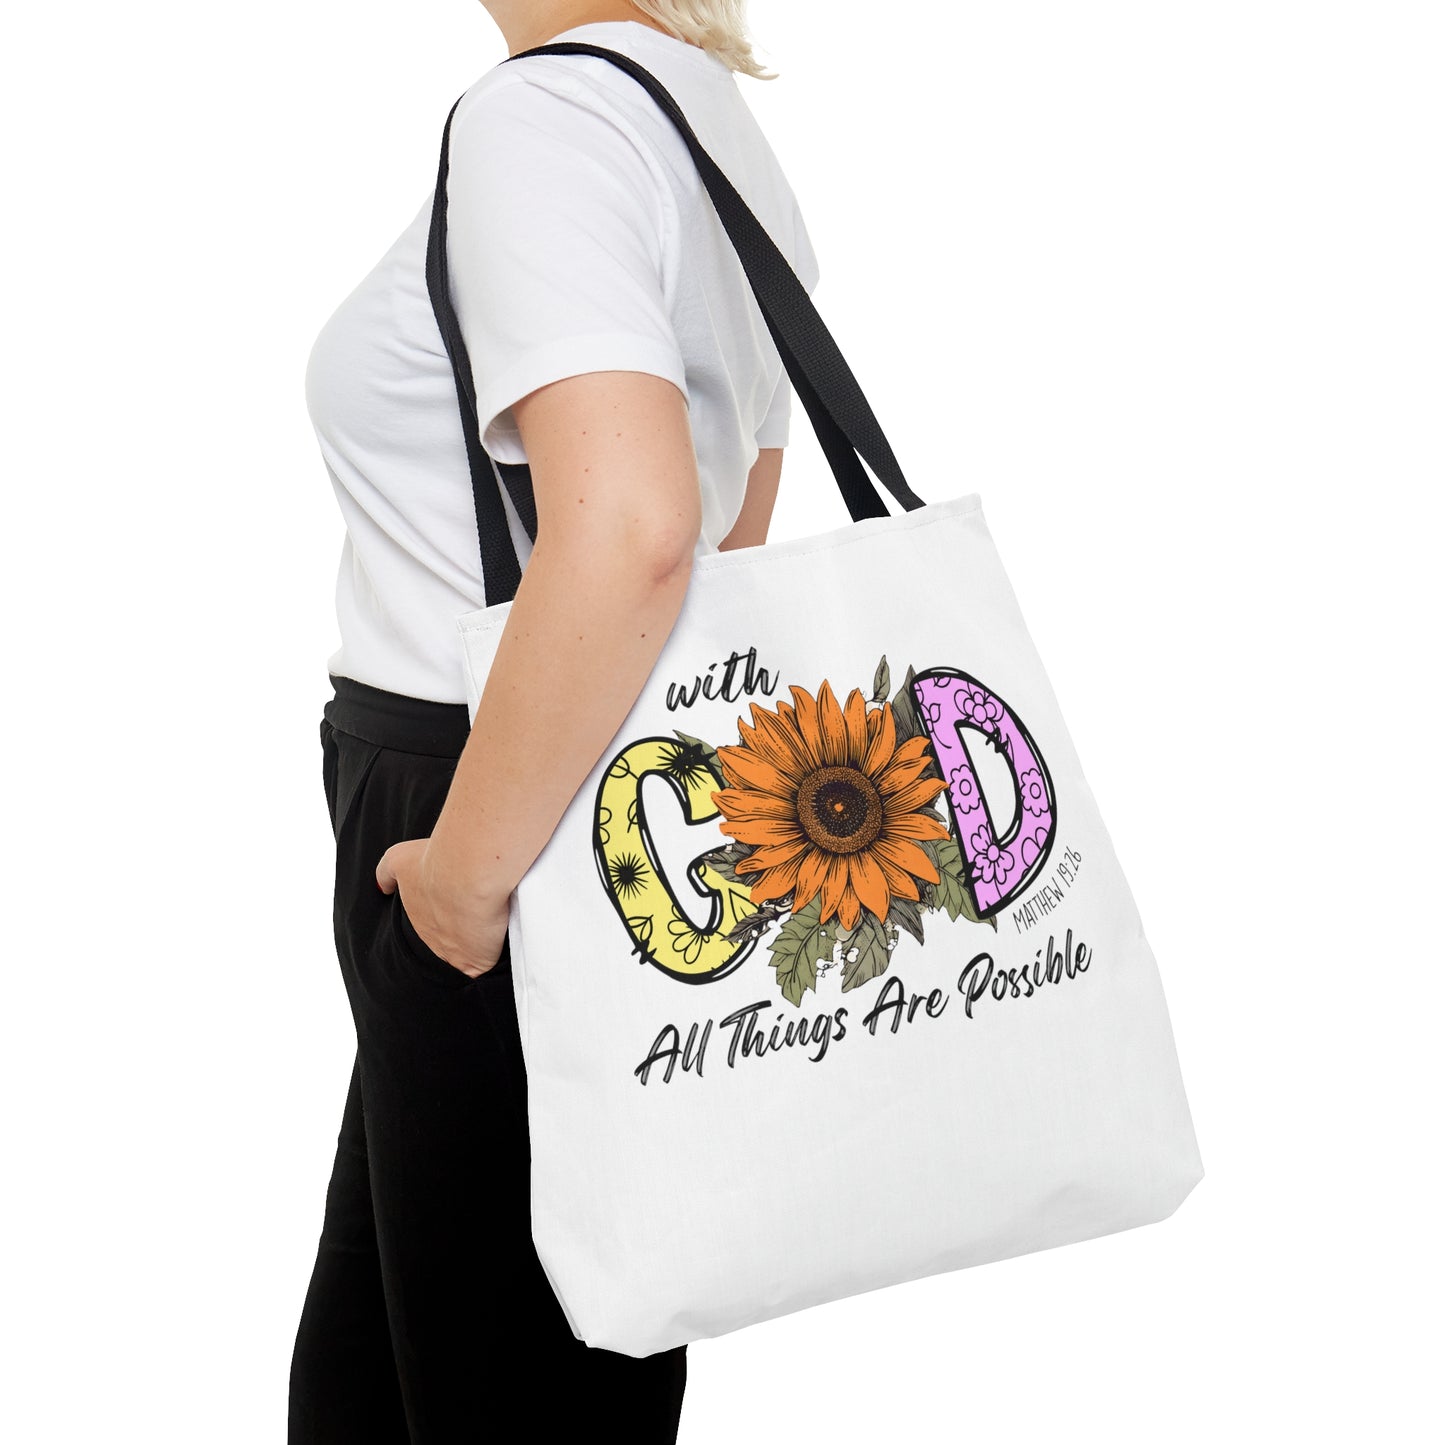 All Things Are Possible With God Tote Bag